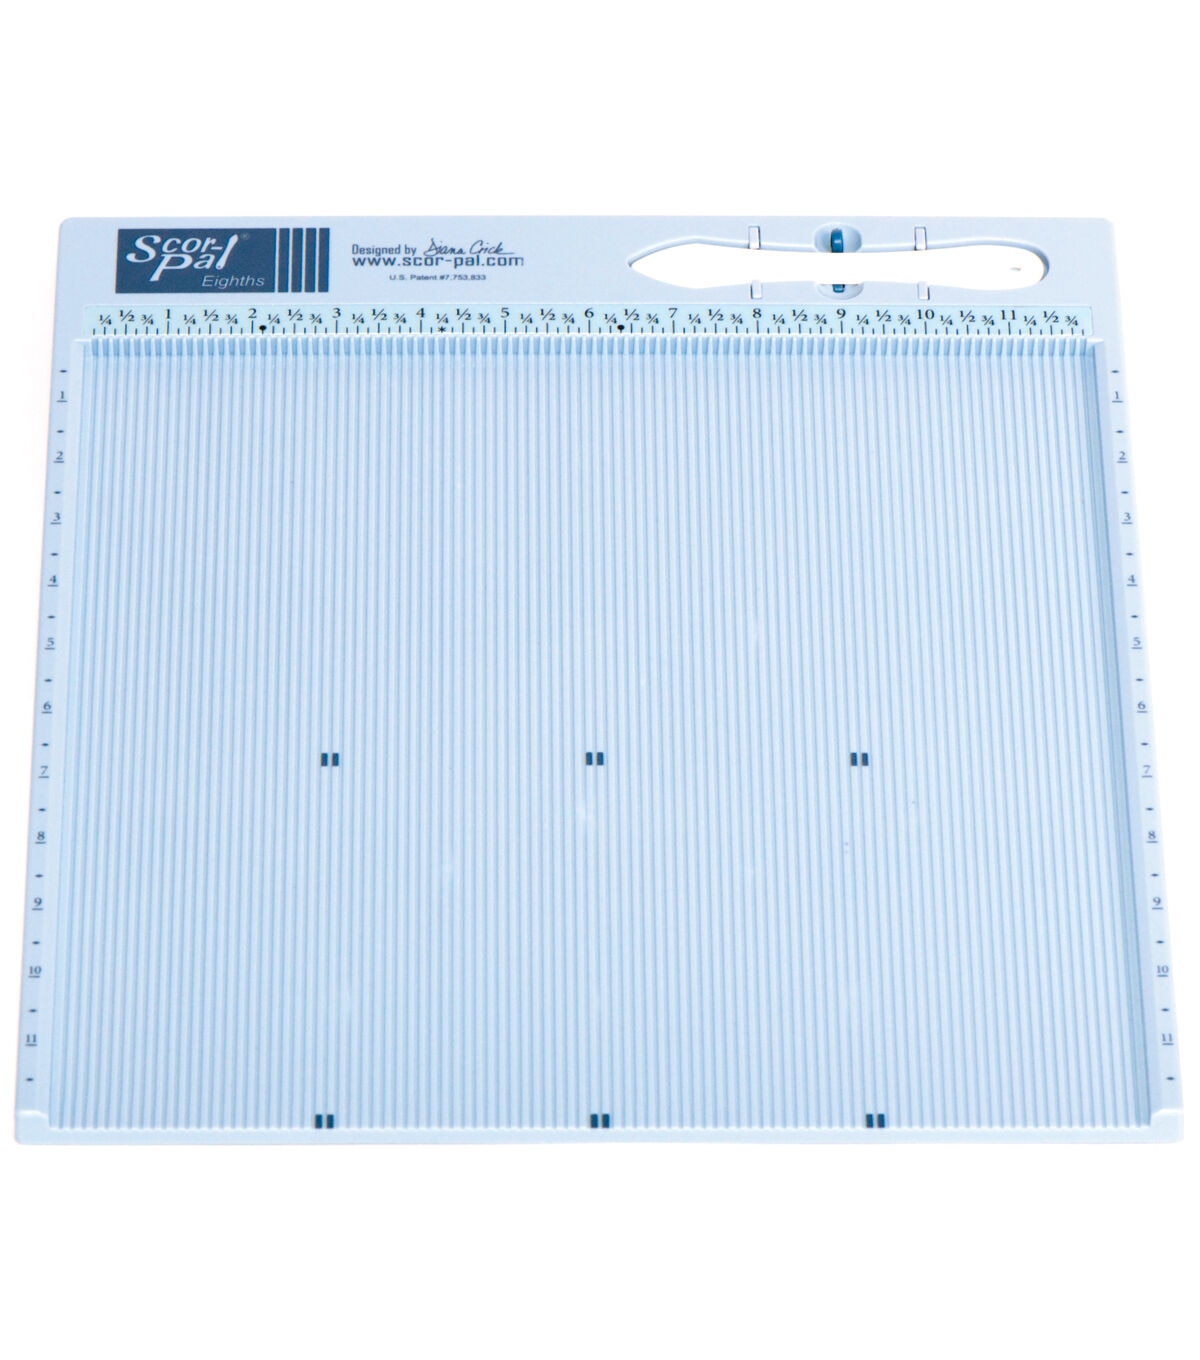 Scor-Pal Eights Measuring & Scoring Board 12X12- Space Grooves